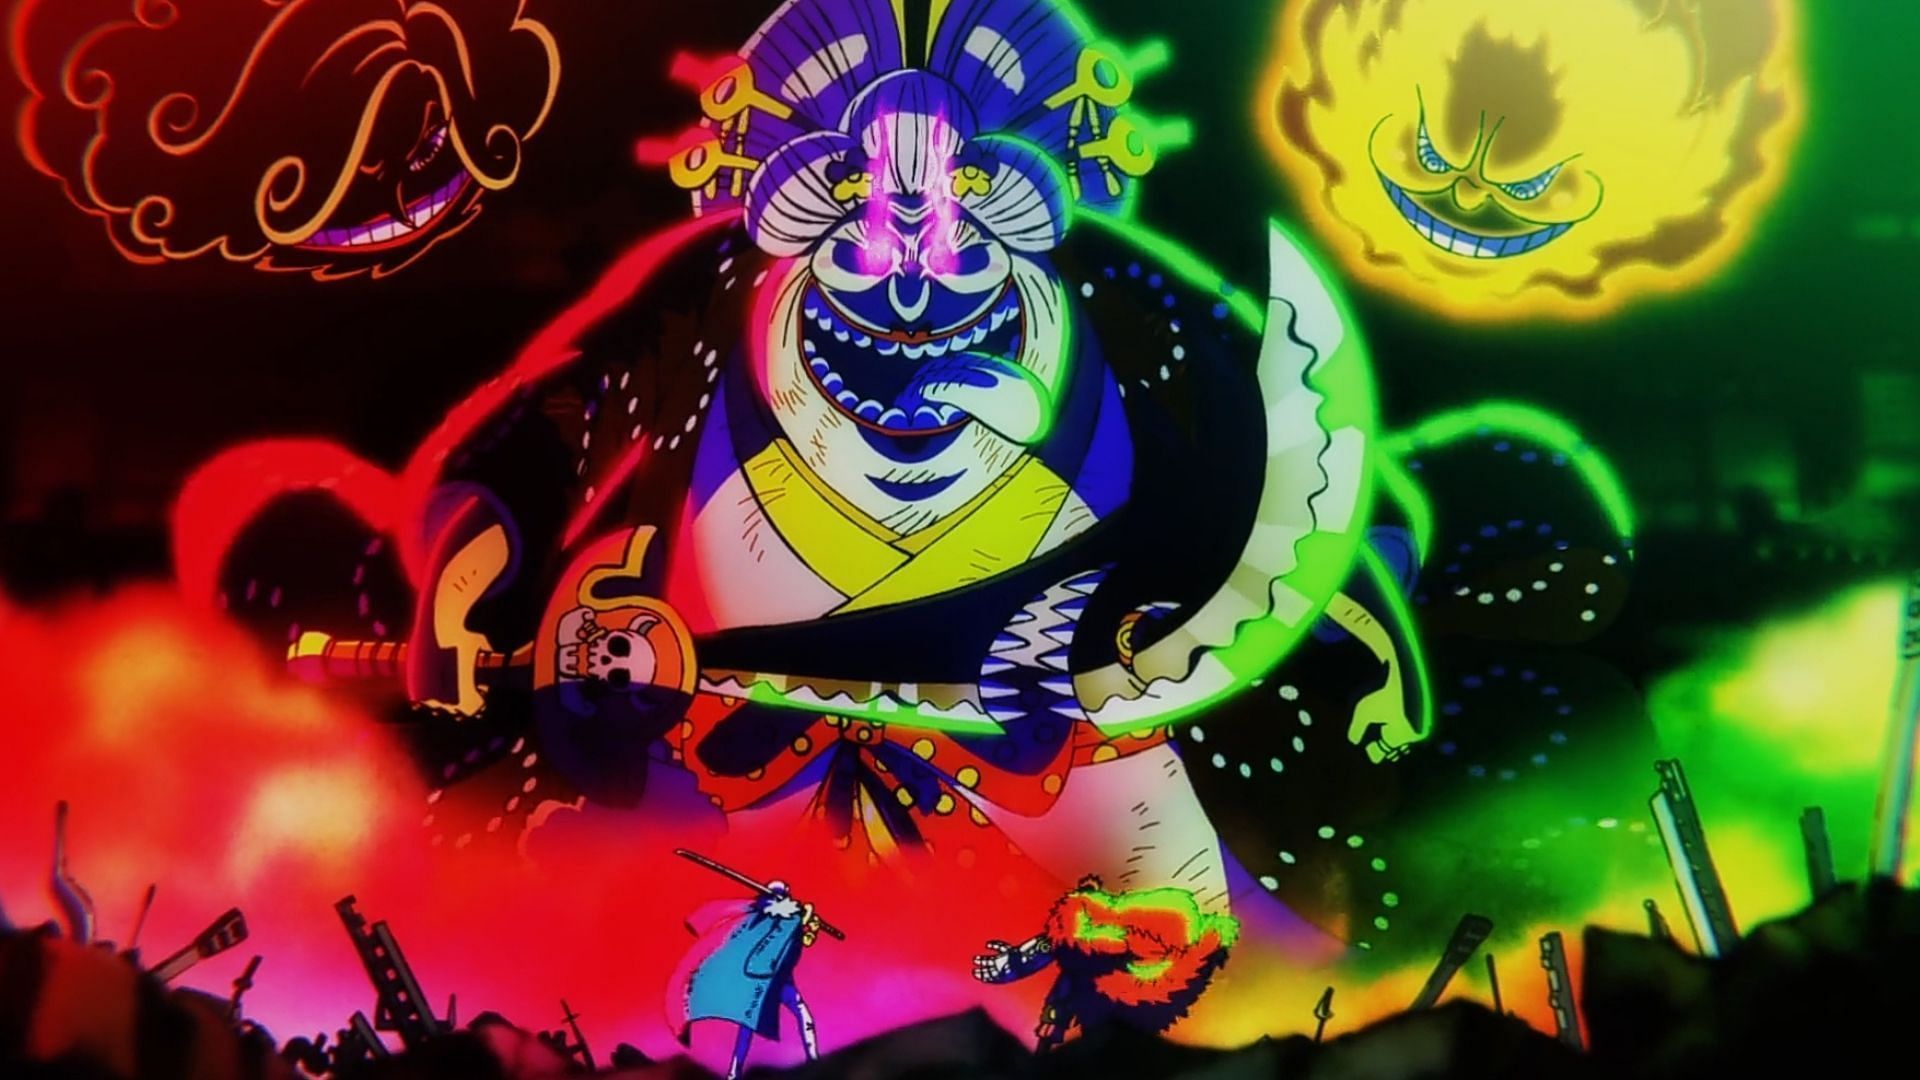 One Piece Episode 1057 Release Date, What to Expect? A Thrilling